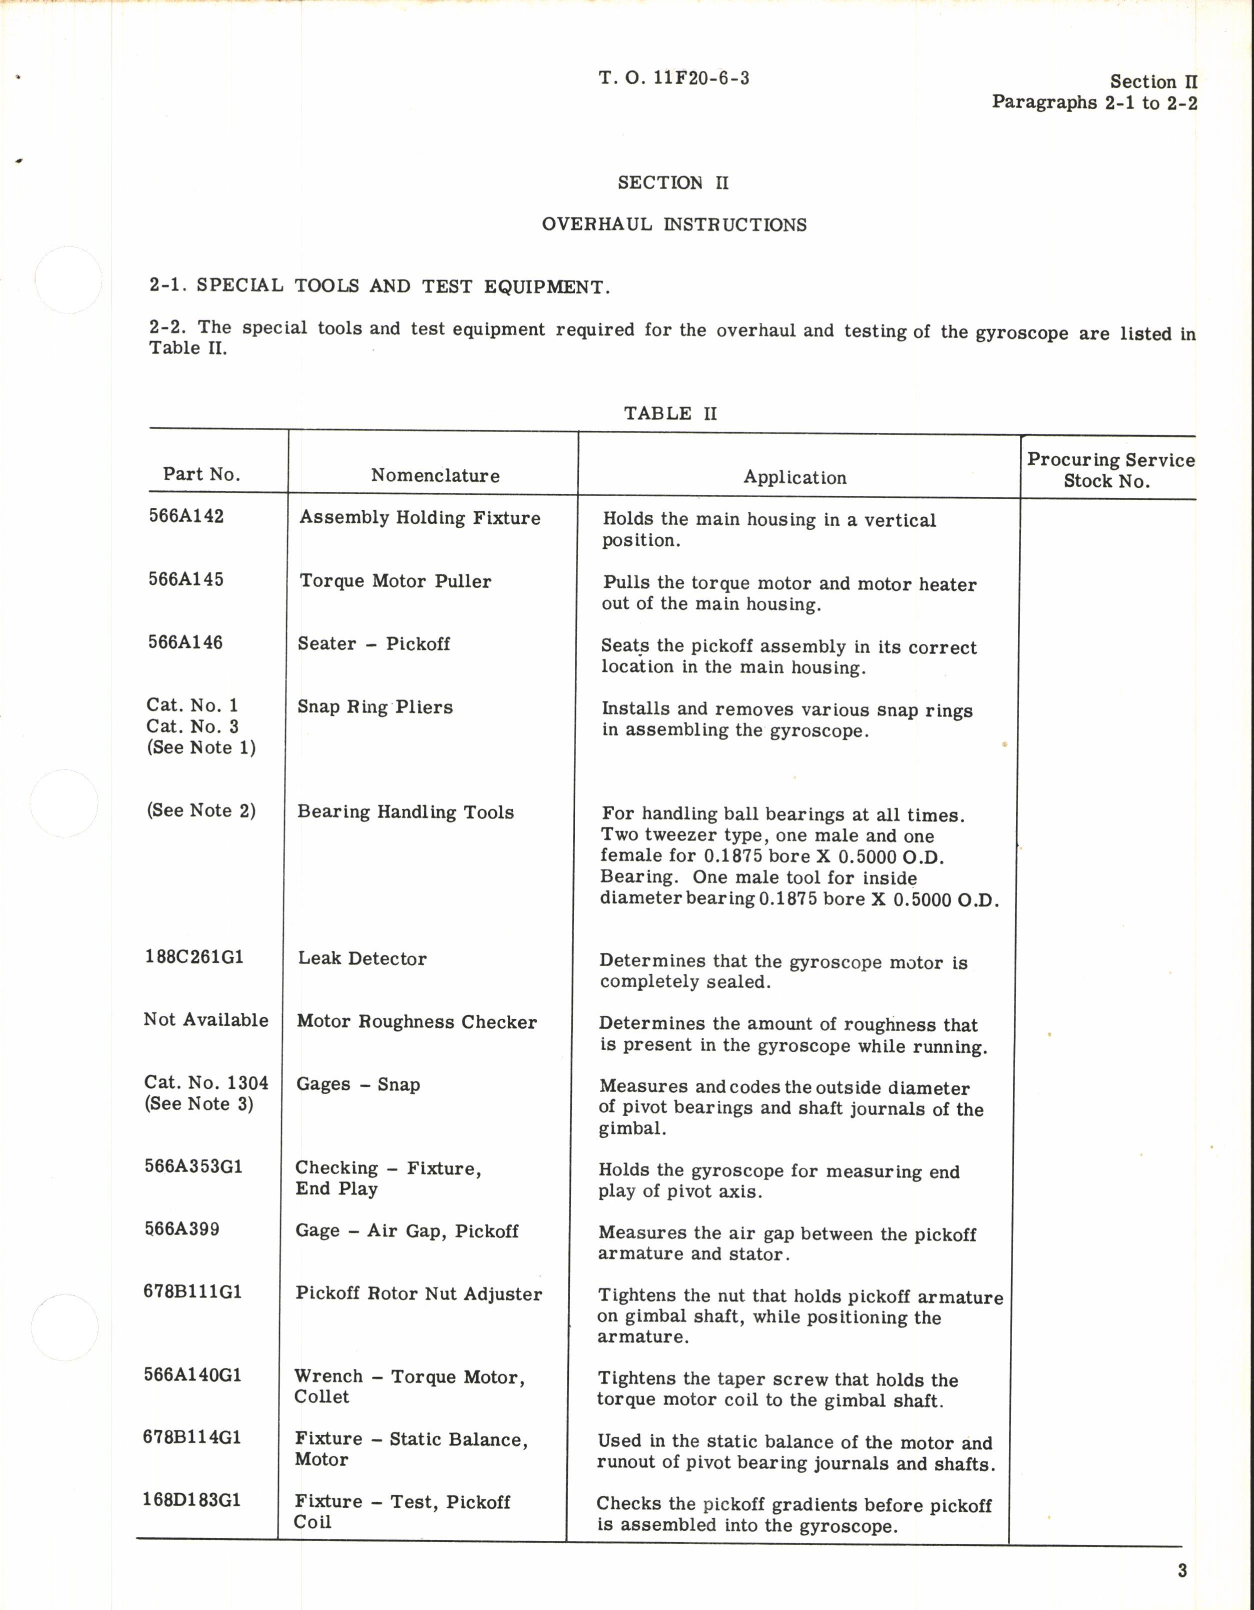 Sample page 7 from AirCorps Library document: Overhaul Instructions for Rate Gyroscope Part No. 147D357G2, Type KR-5C2